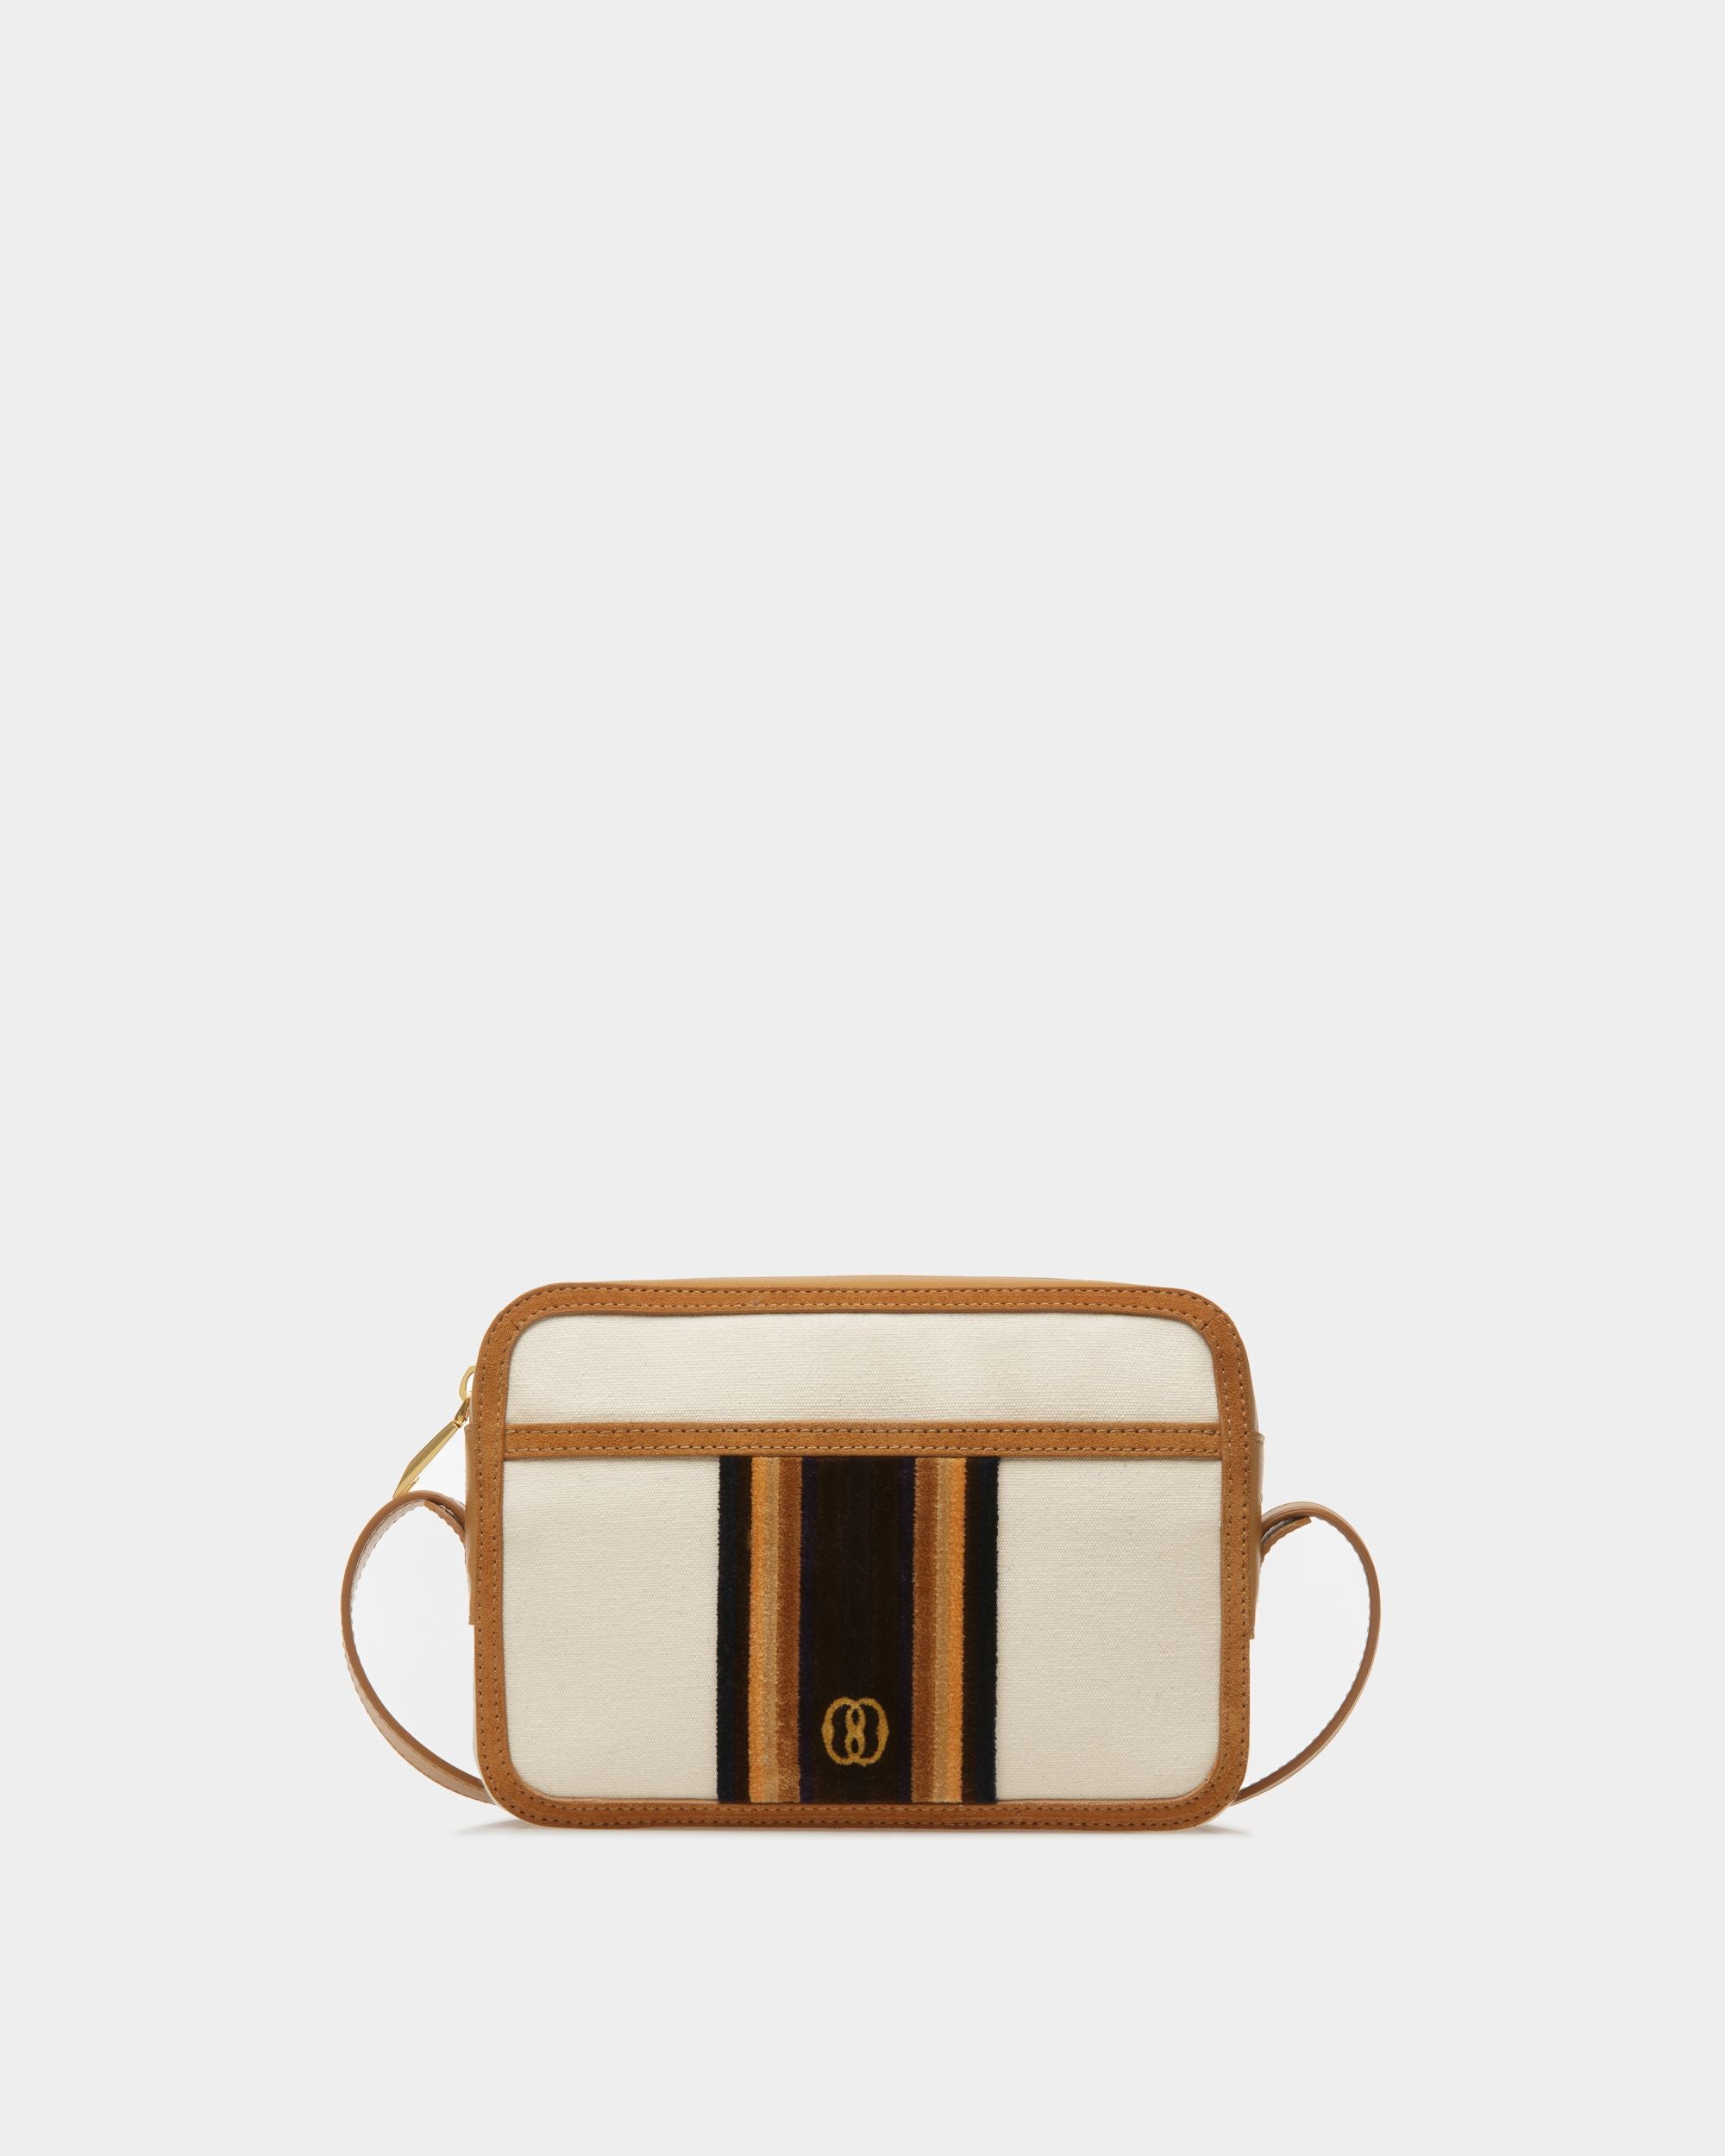 Day Out | Men's Crossbody Bag | Natural And Desert Fabric | Bally | Still Life Front